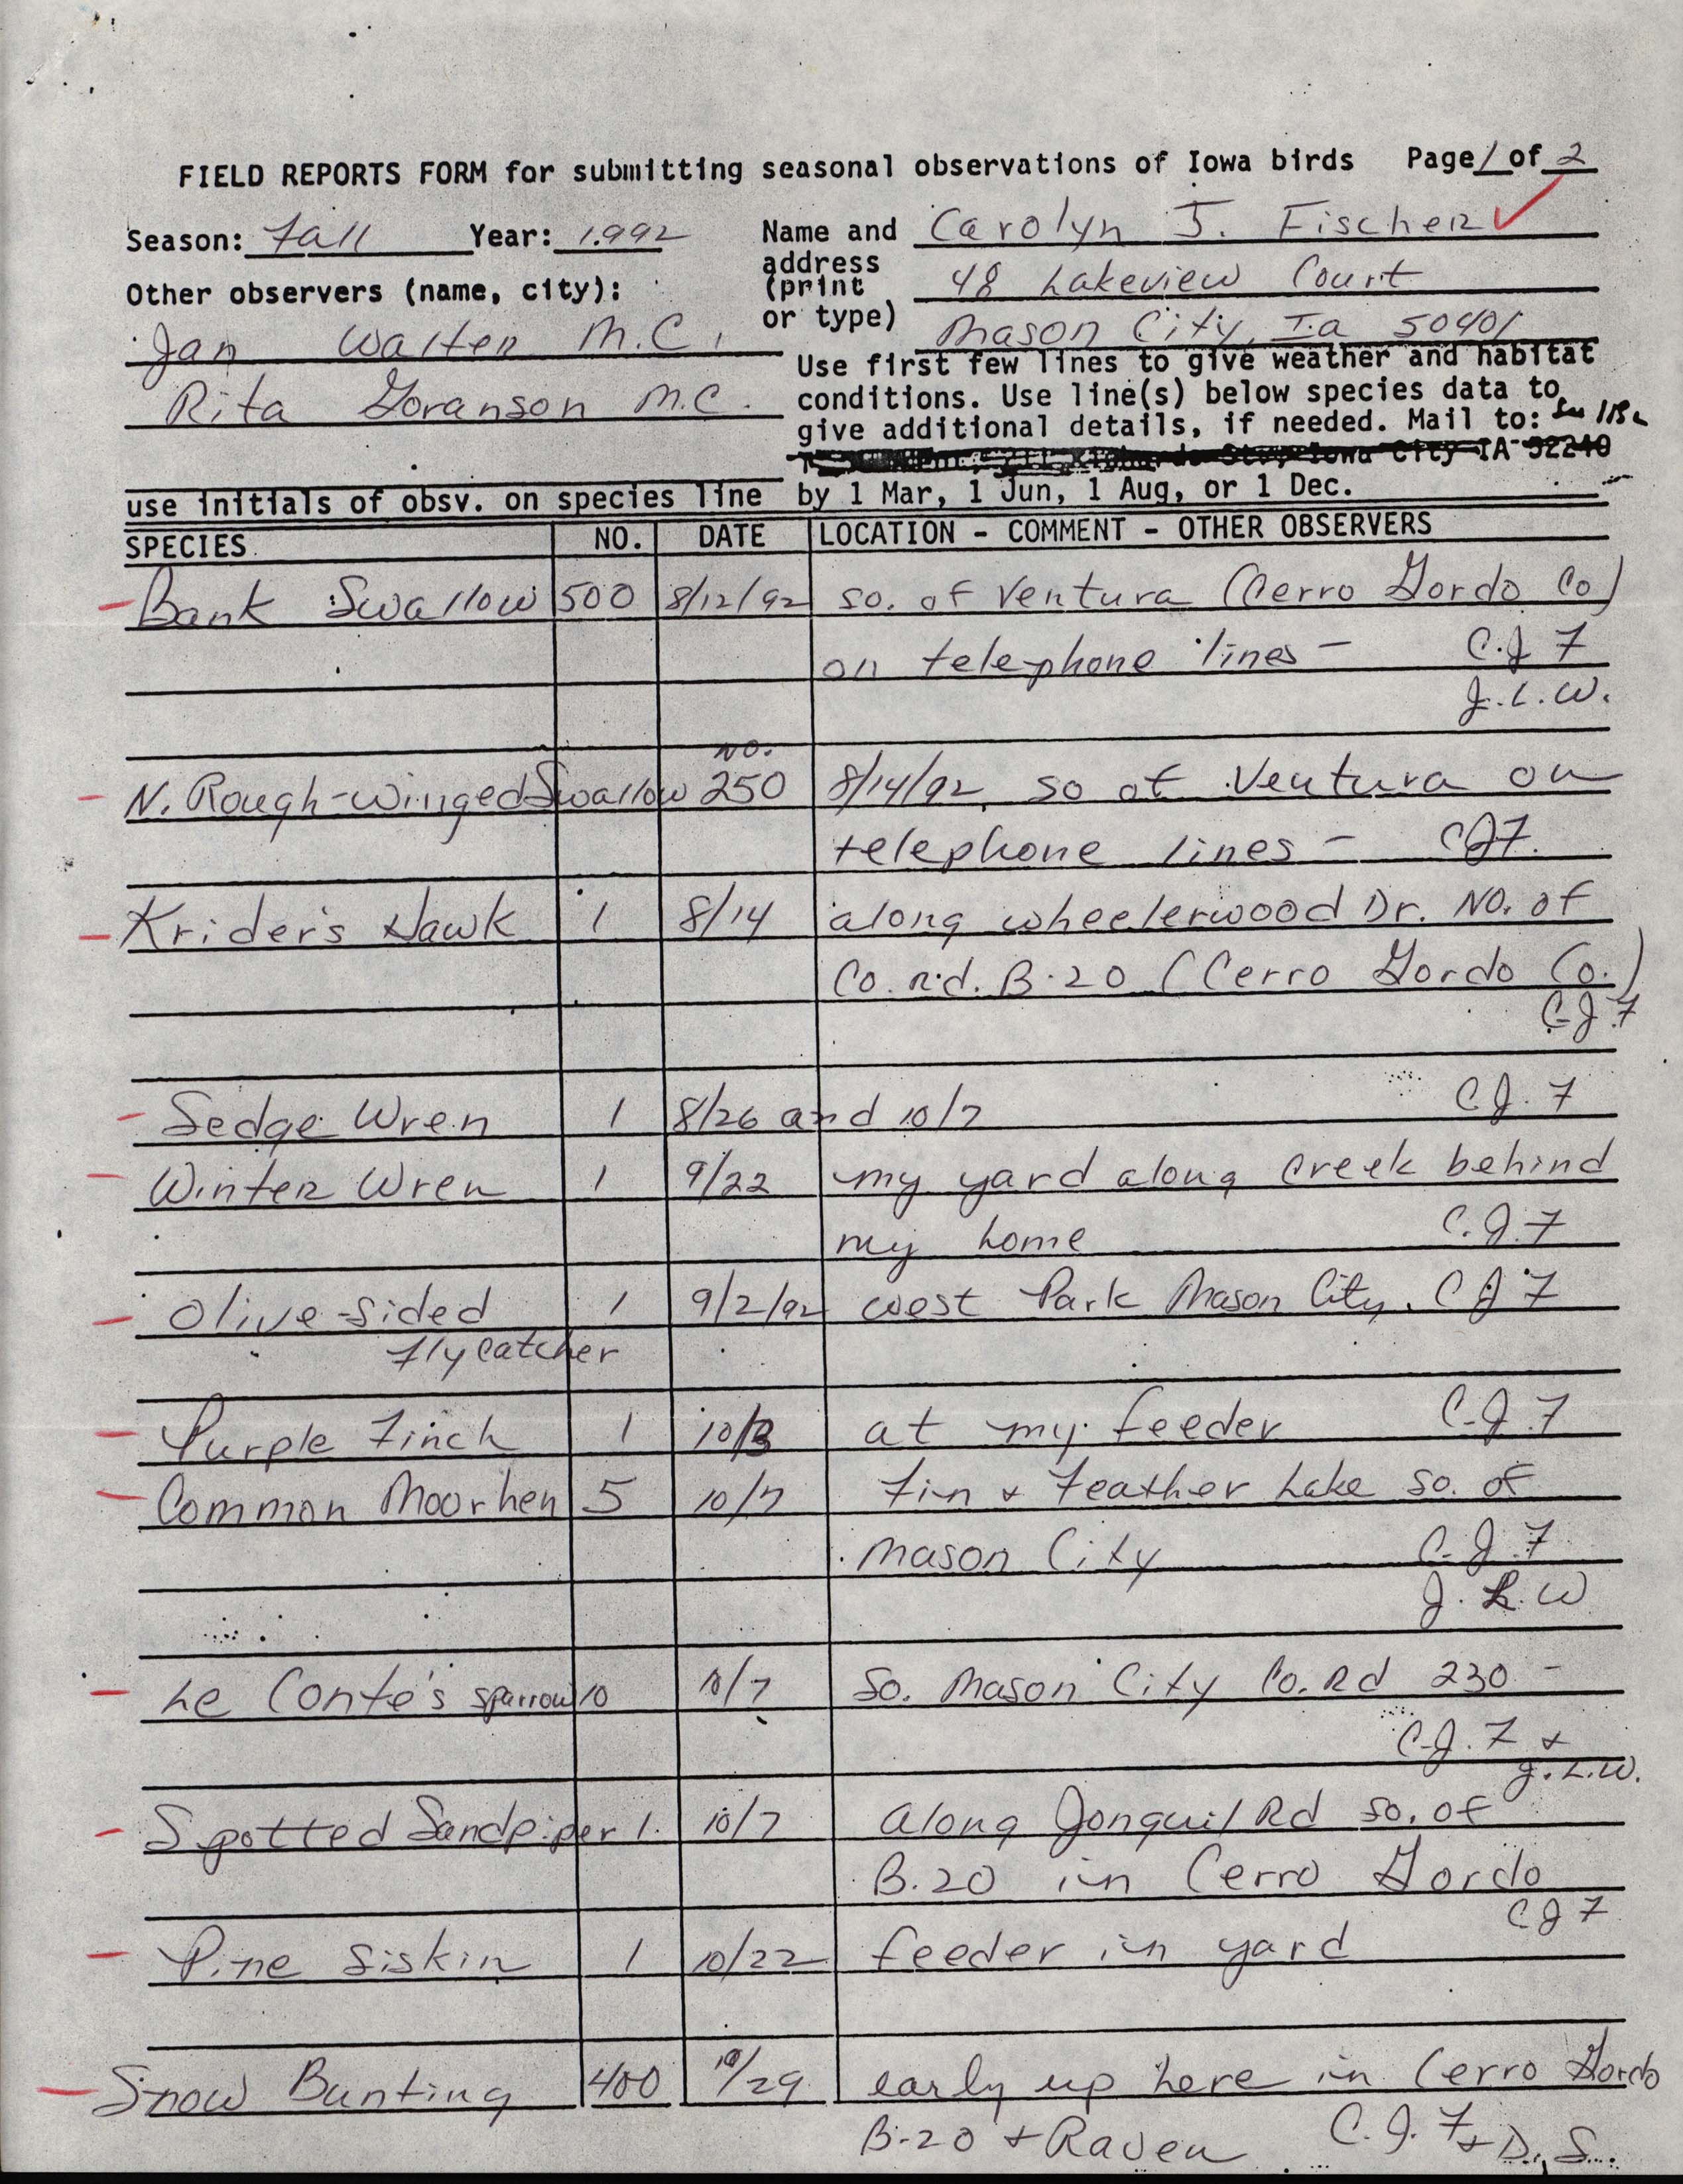 Field reports form for submitting seasonal observations of Iowa birds, Carolyn J. Fischer, fall 1992